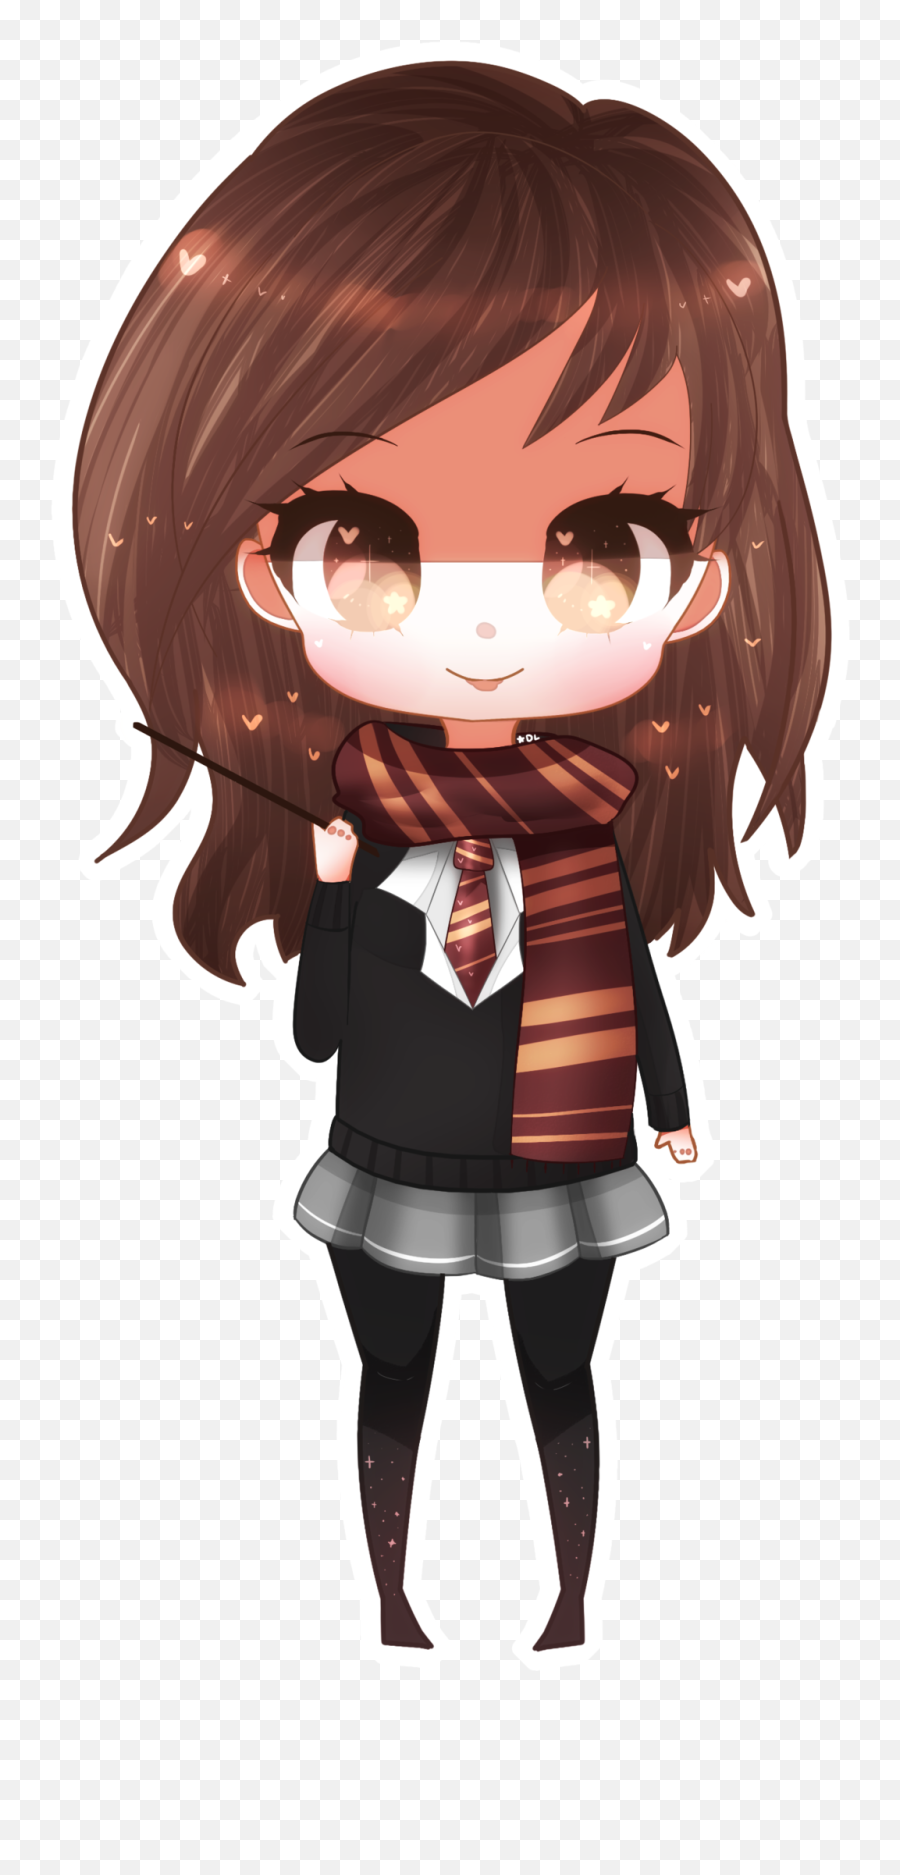 Chibi Hermione - Drawing Chibi Harry Potter Png,Hermione Png